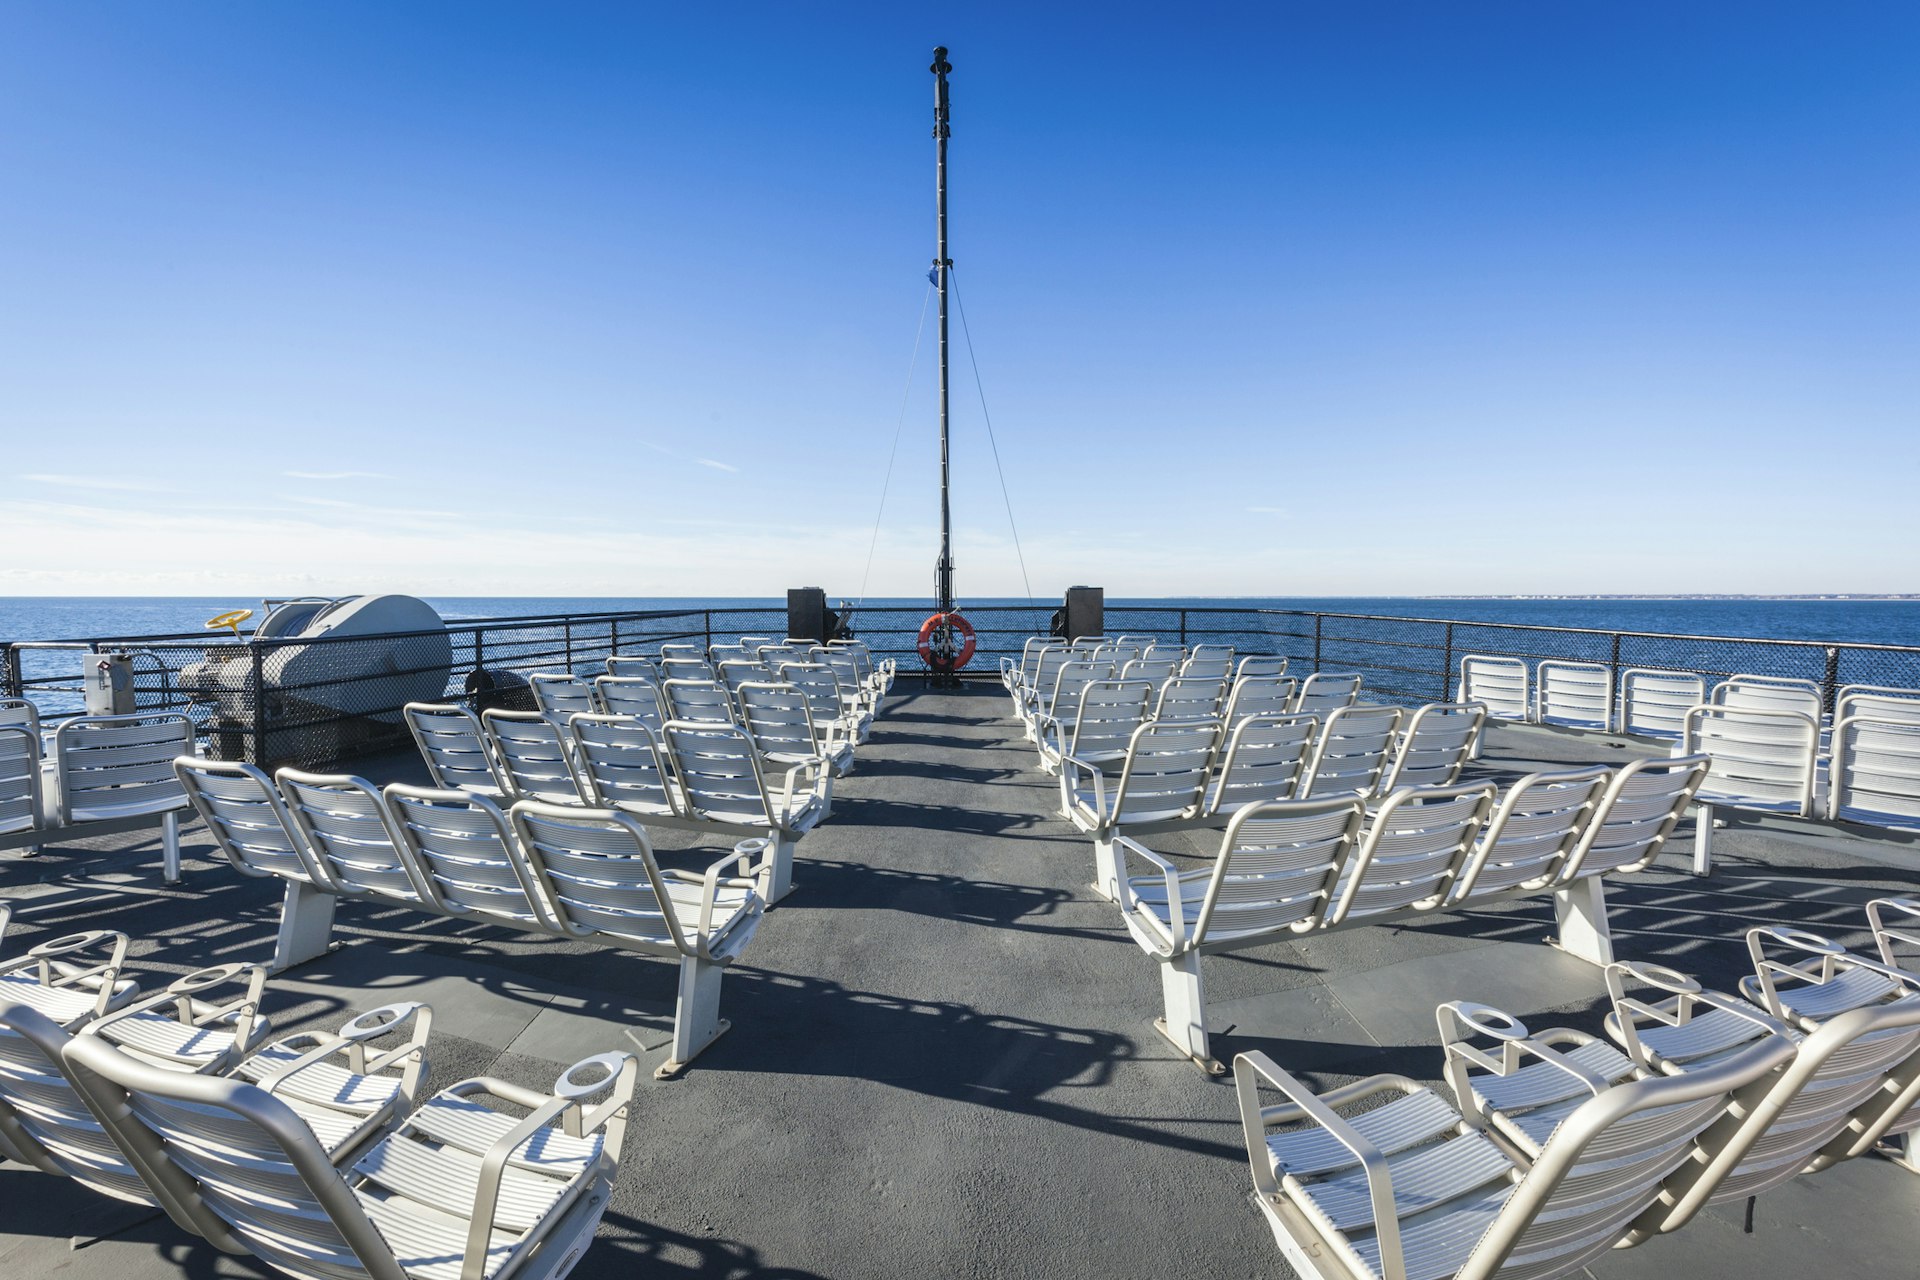 The open deck of the ferry to Cape Cod in Massachusetts